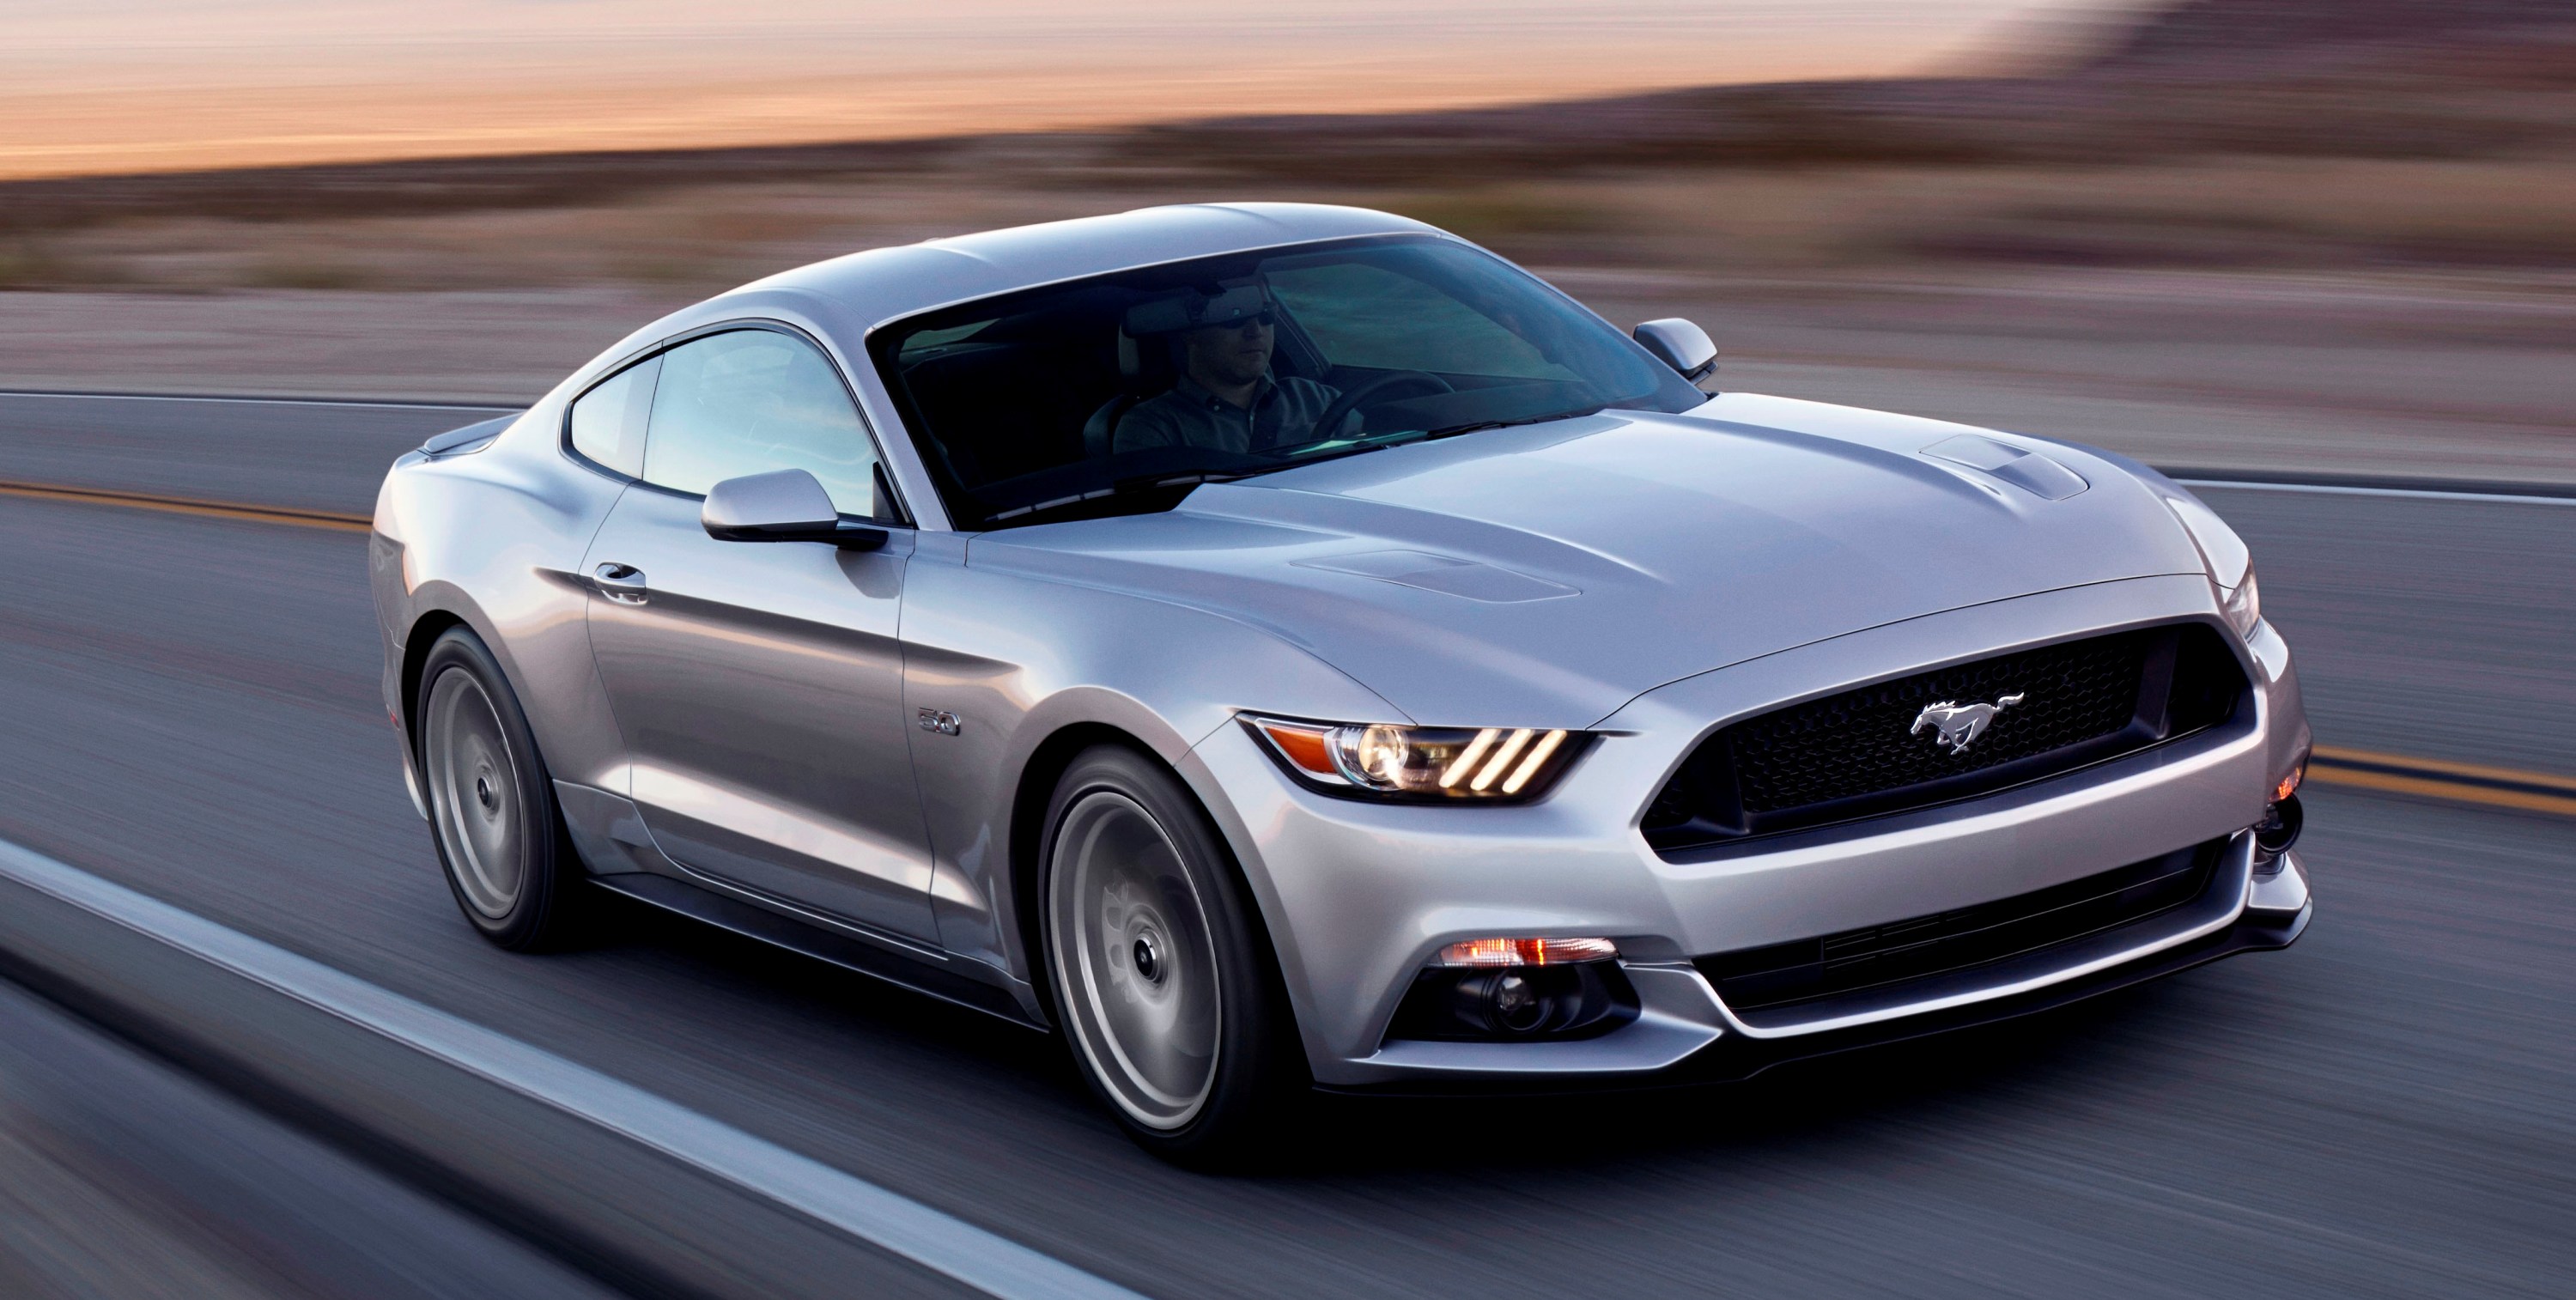 2015 Ford Mustang GT Pics, Vehicles Collection